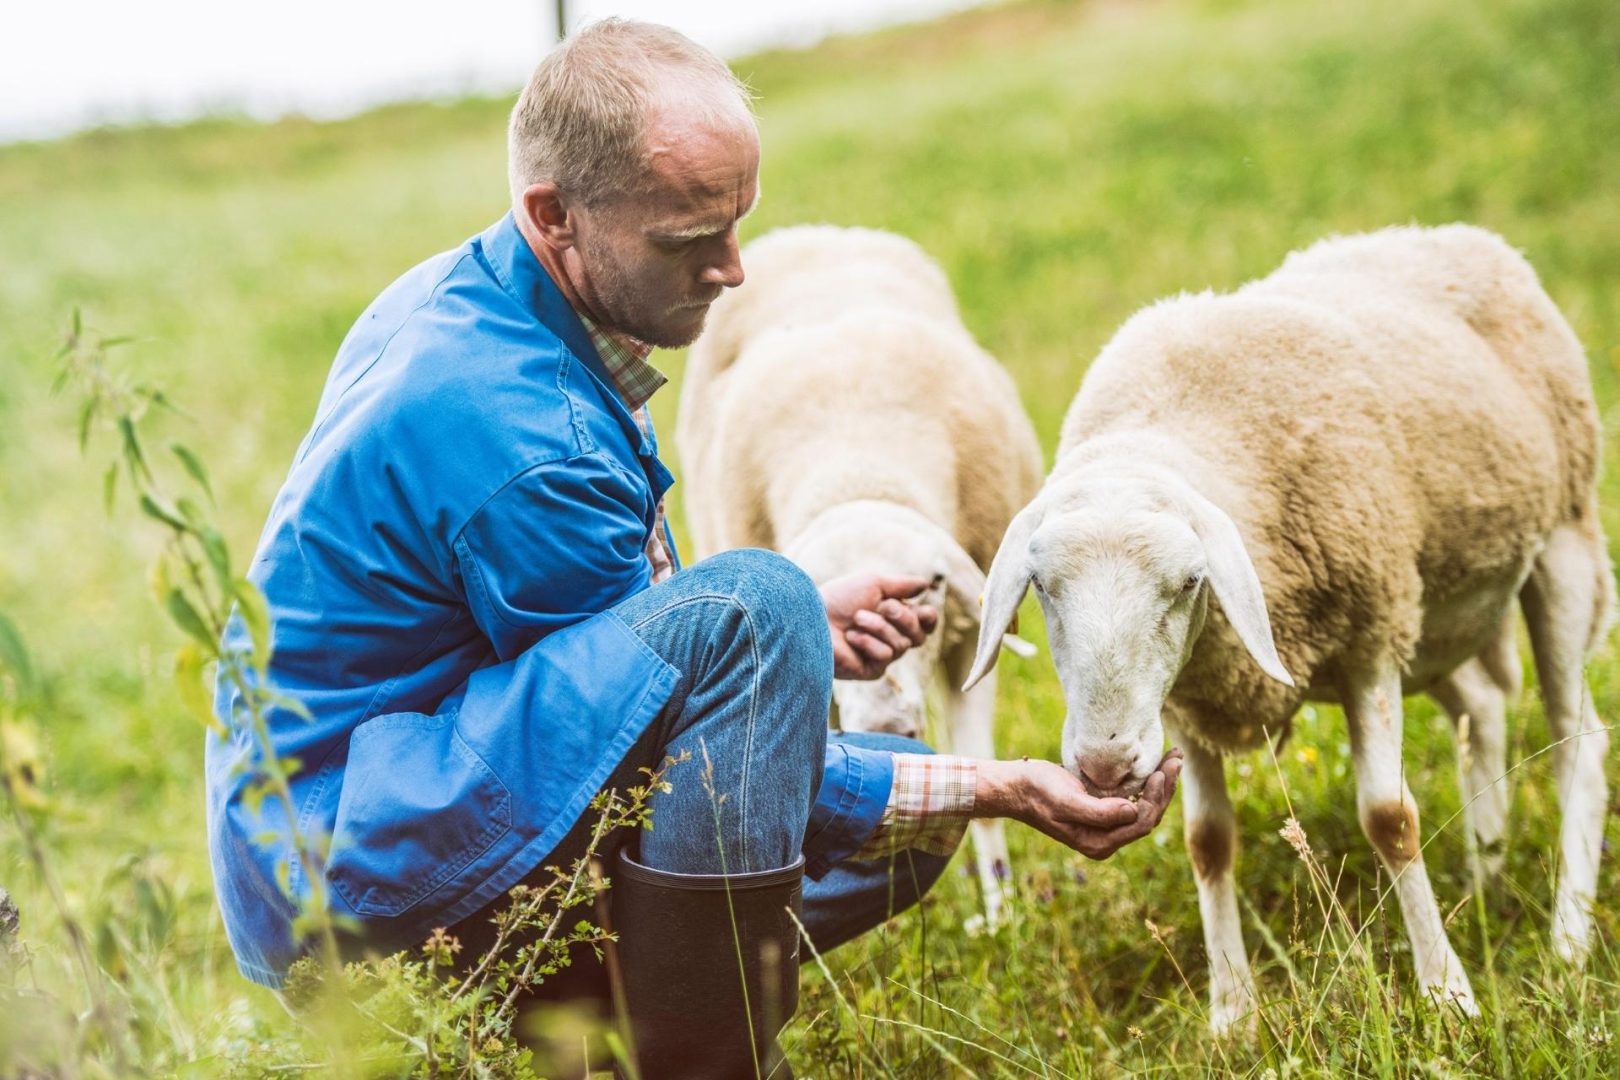 A man in denim crouching in a grassy field, feeding two sheep with food in his hand.